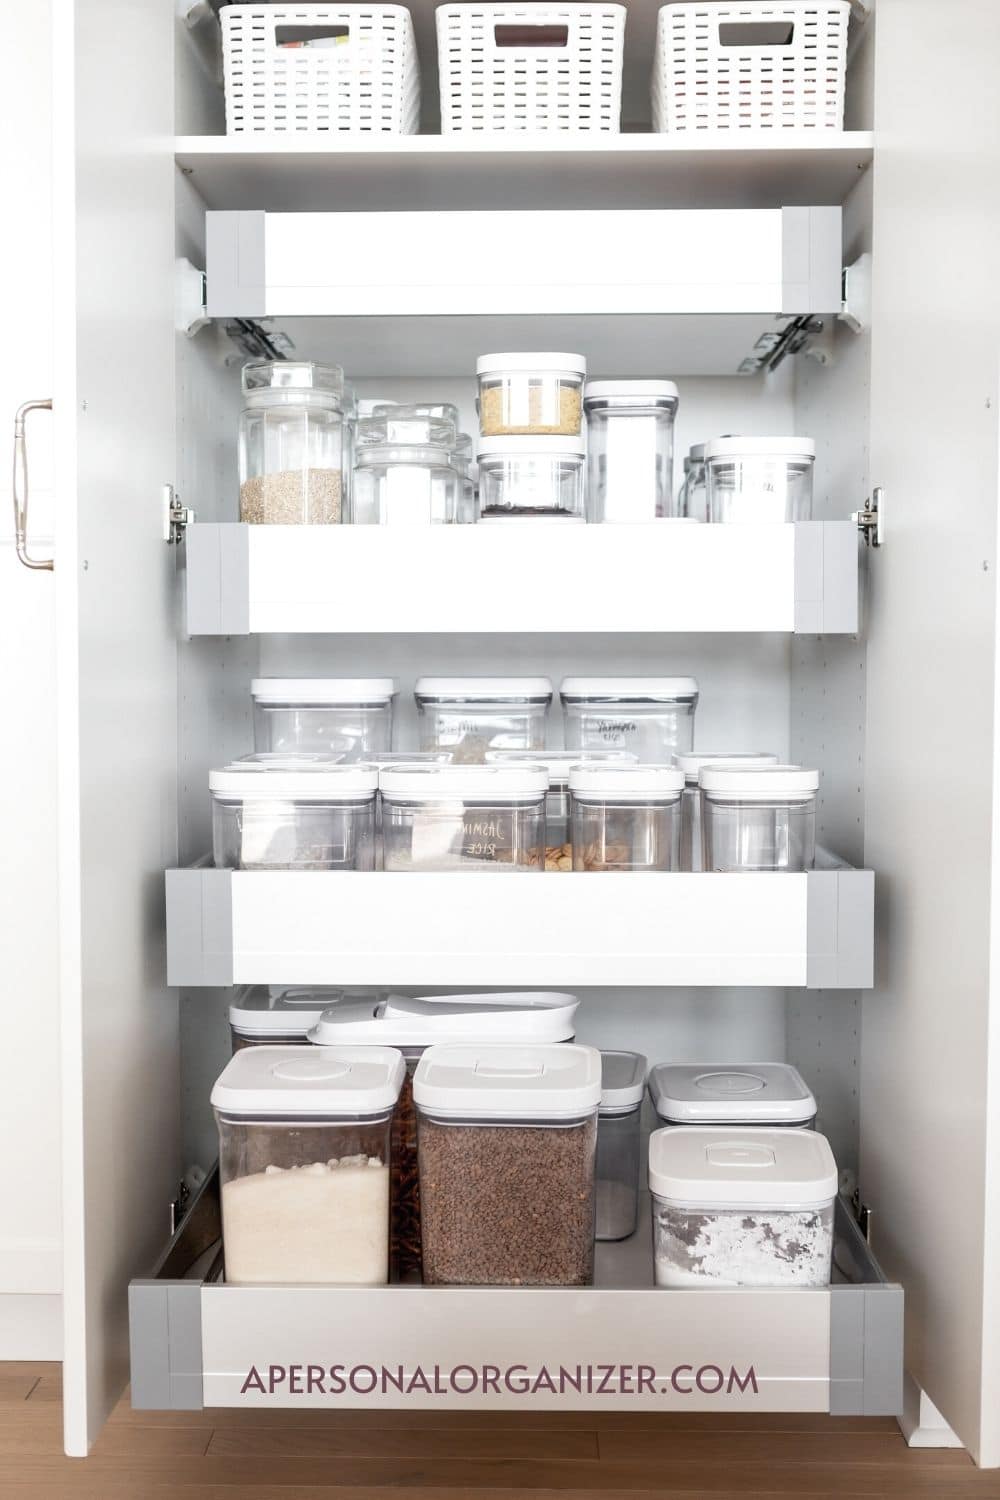 9 Reasons to Keep Your Pantry Organized